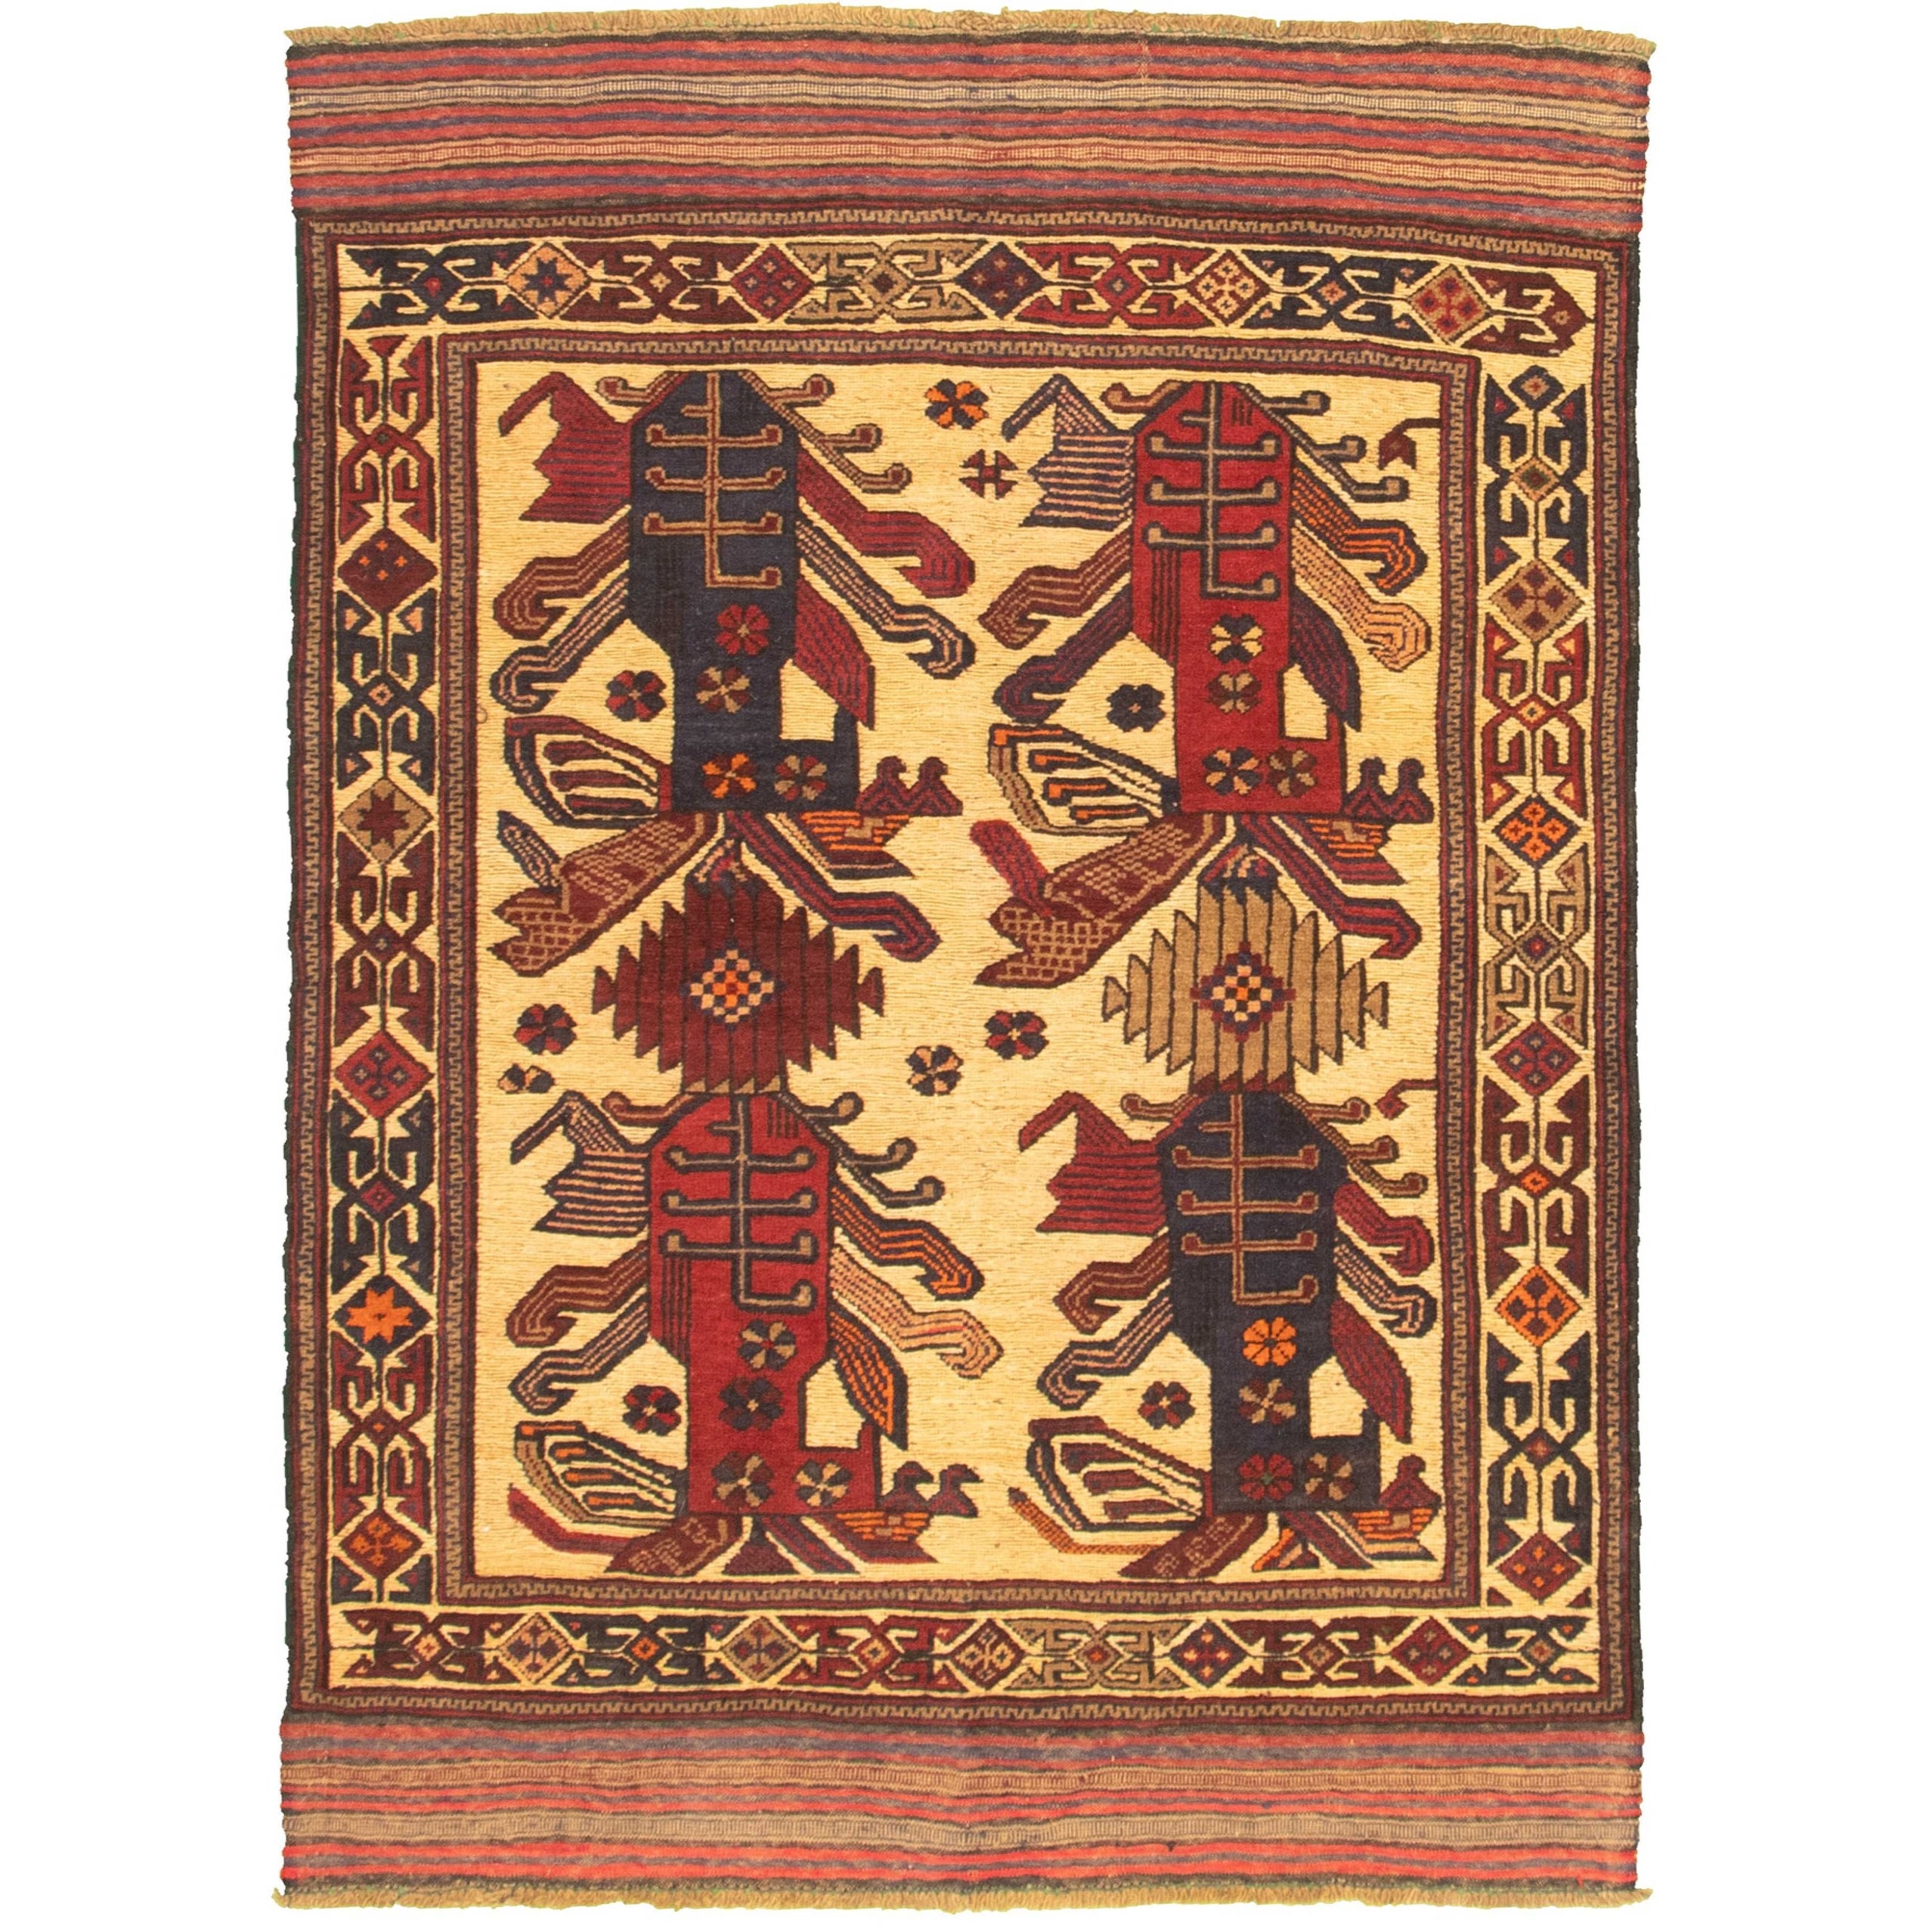 eCarpet Gallery Area Rug for Living Room Bedroom 346350 Hand-Knotted Wool Rug Bold and Colorful Bordered Red Kilim 4'3 x 5'10 